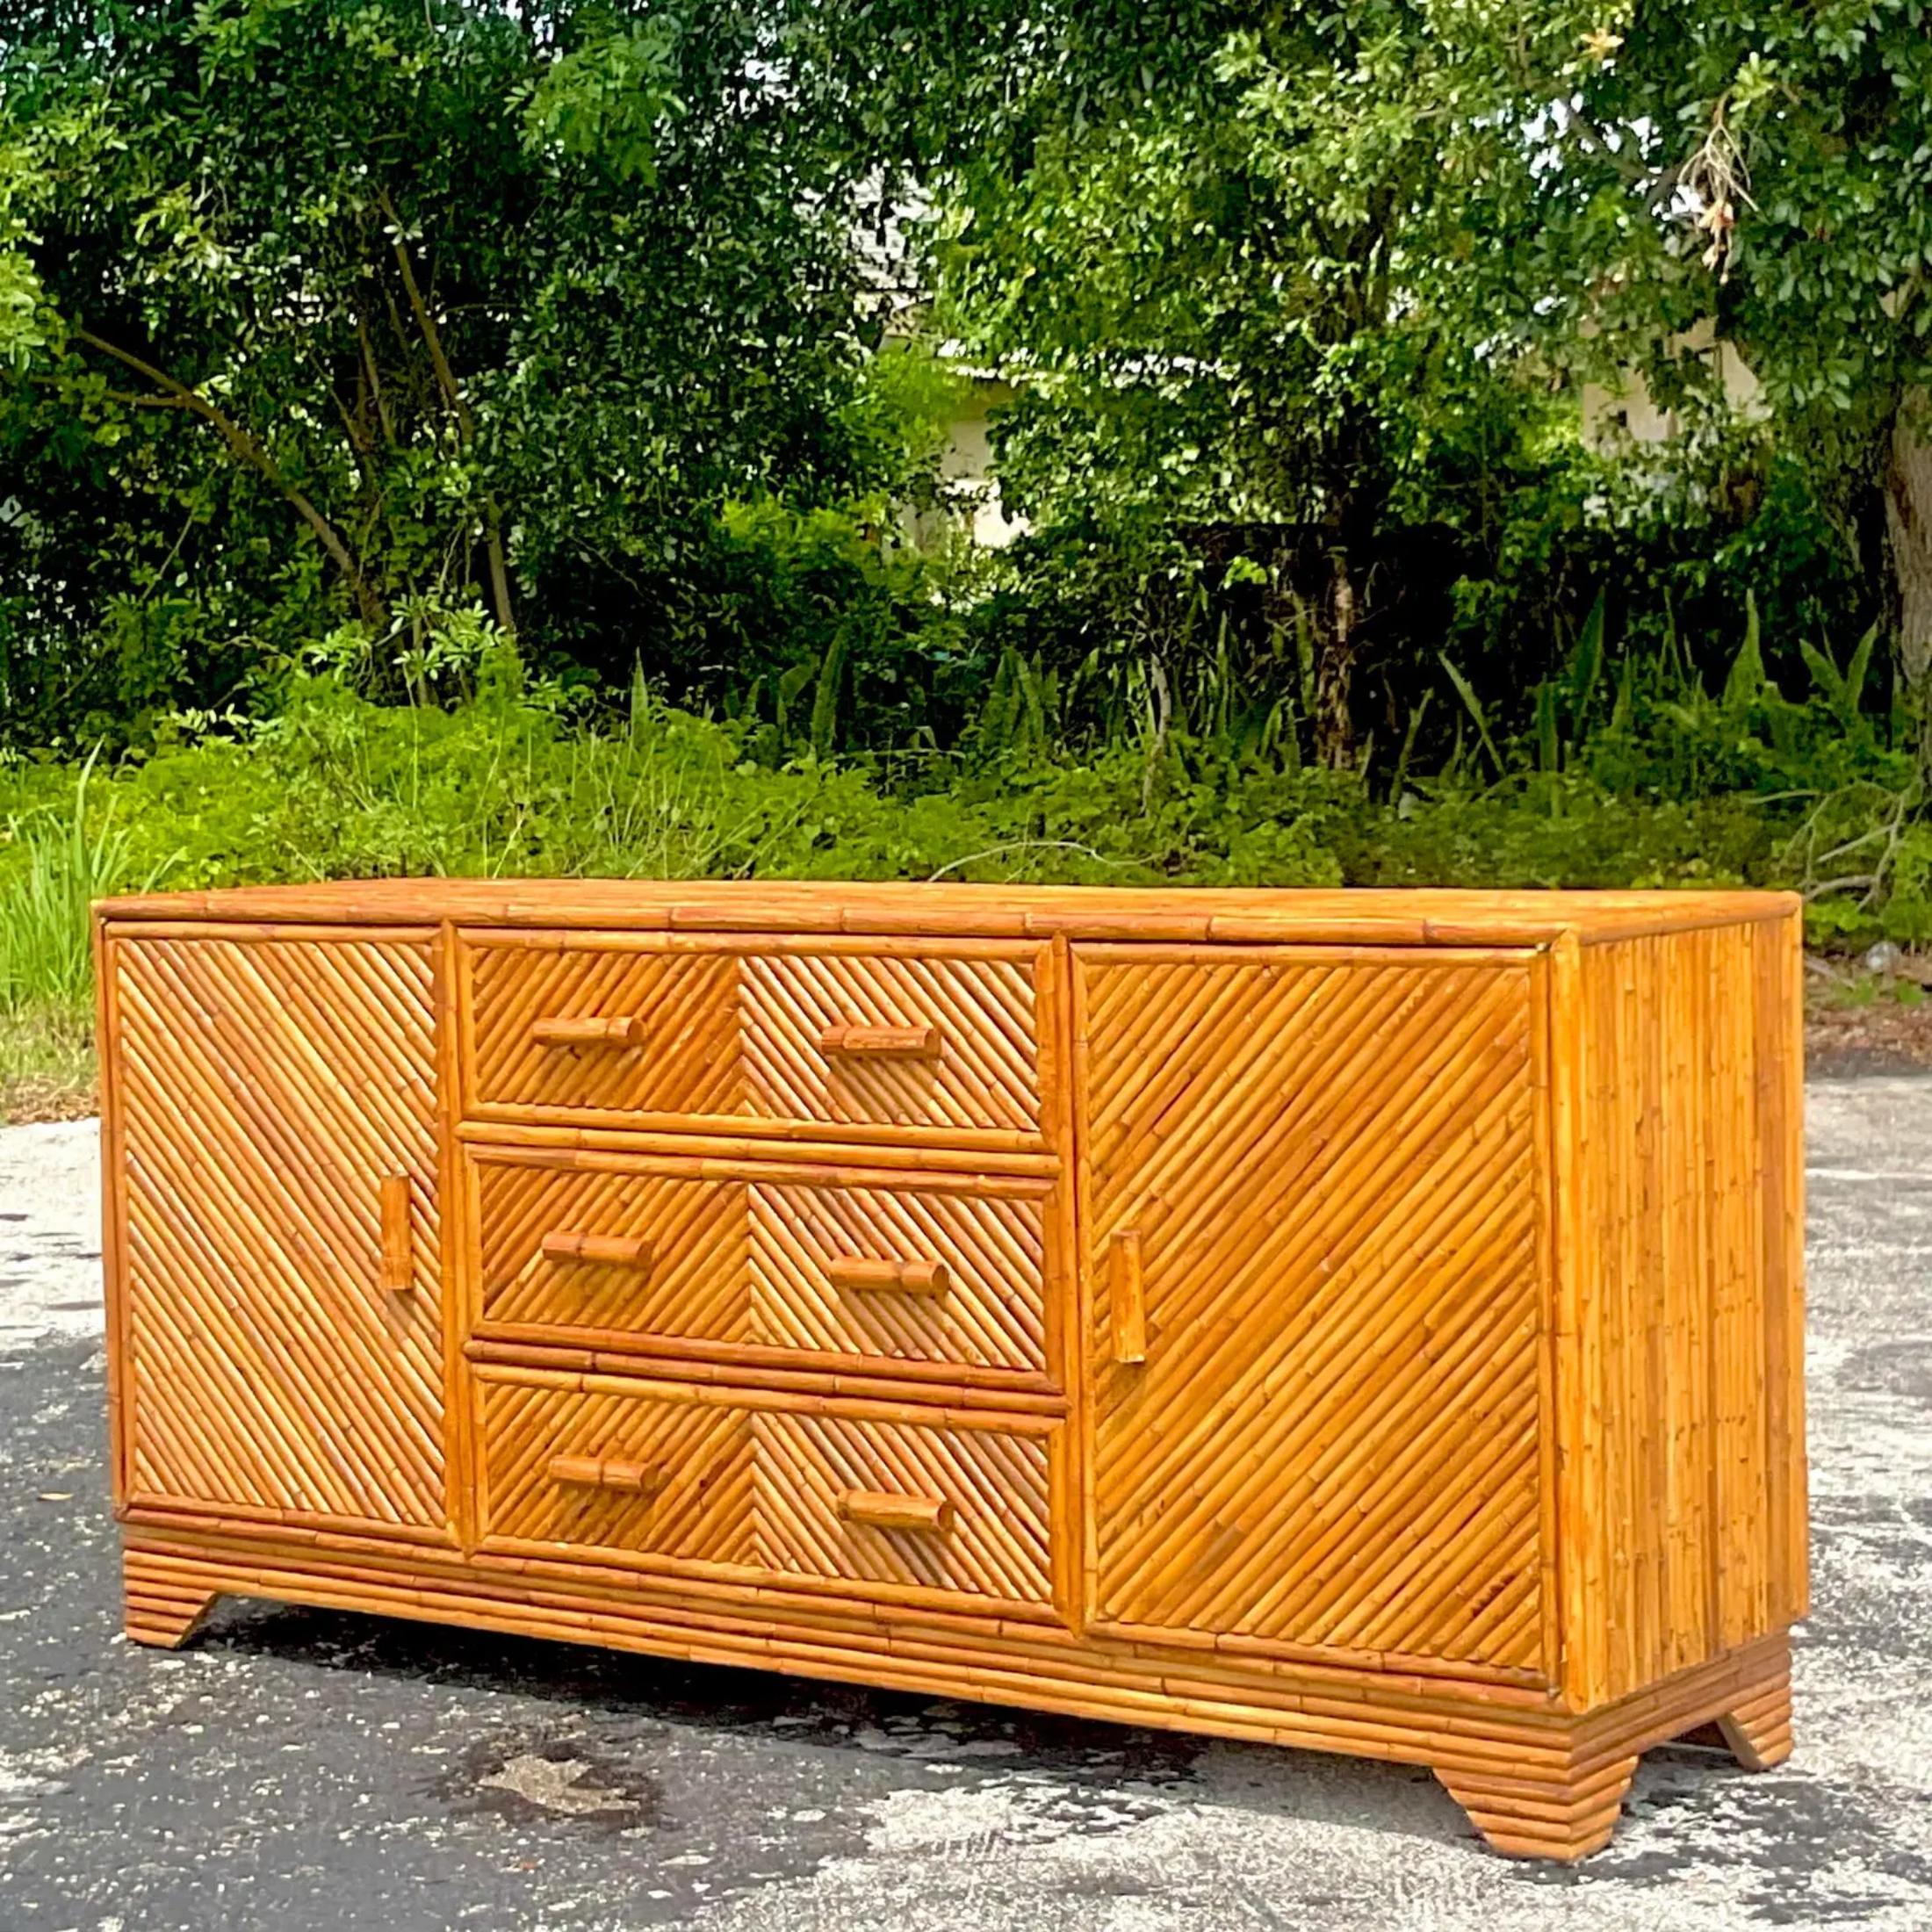 A truly spectacular vintage Coastal credenza. Chic thick rattan in a Chevron design. Lots of great storage below with cabinets and drawers. Acquired from a Palm Beach estate